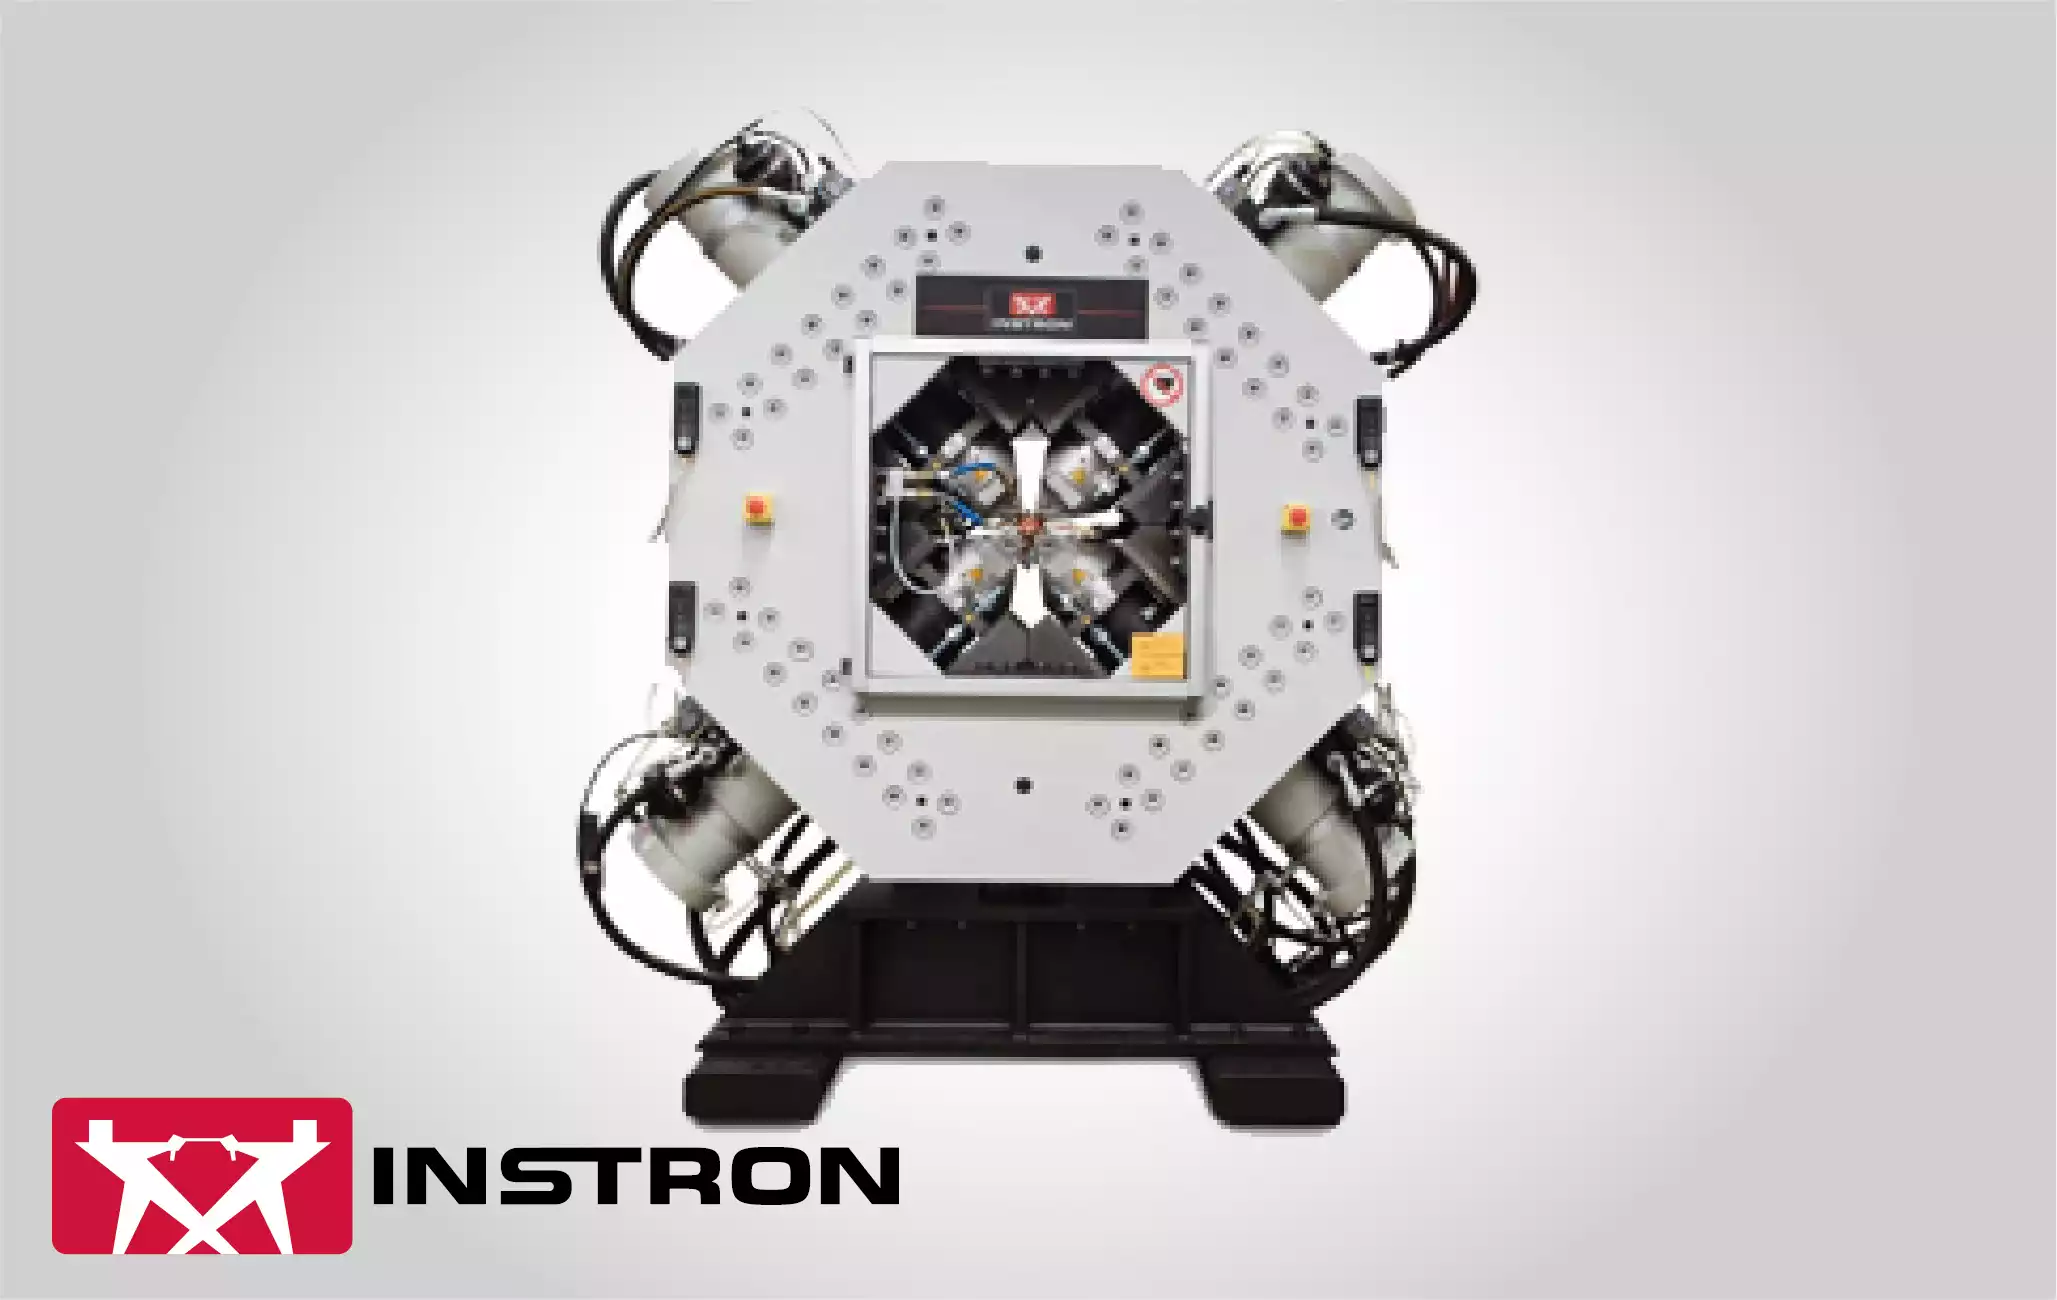 Instron Biaxial Cruciform Test Systems